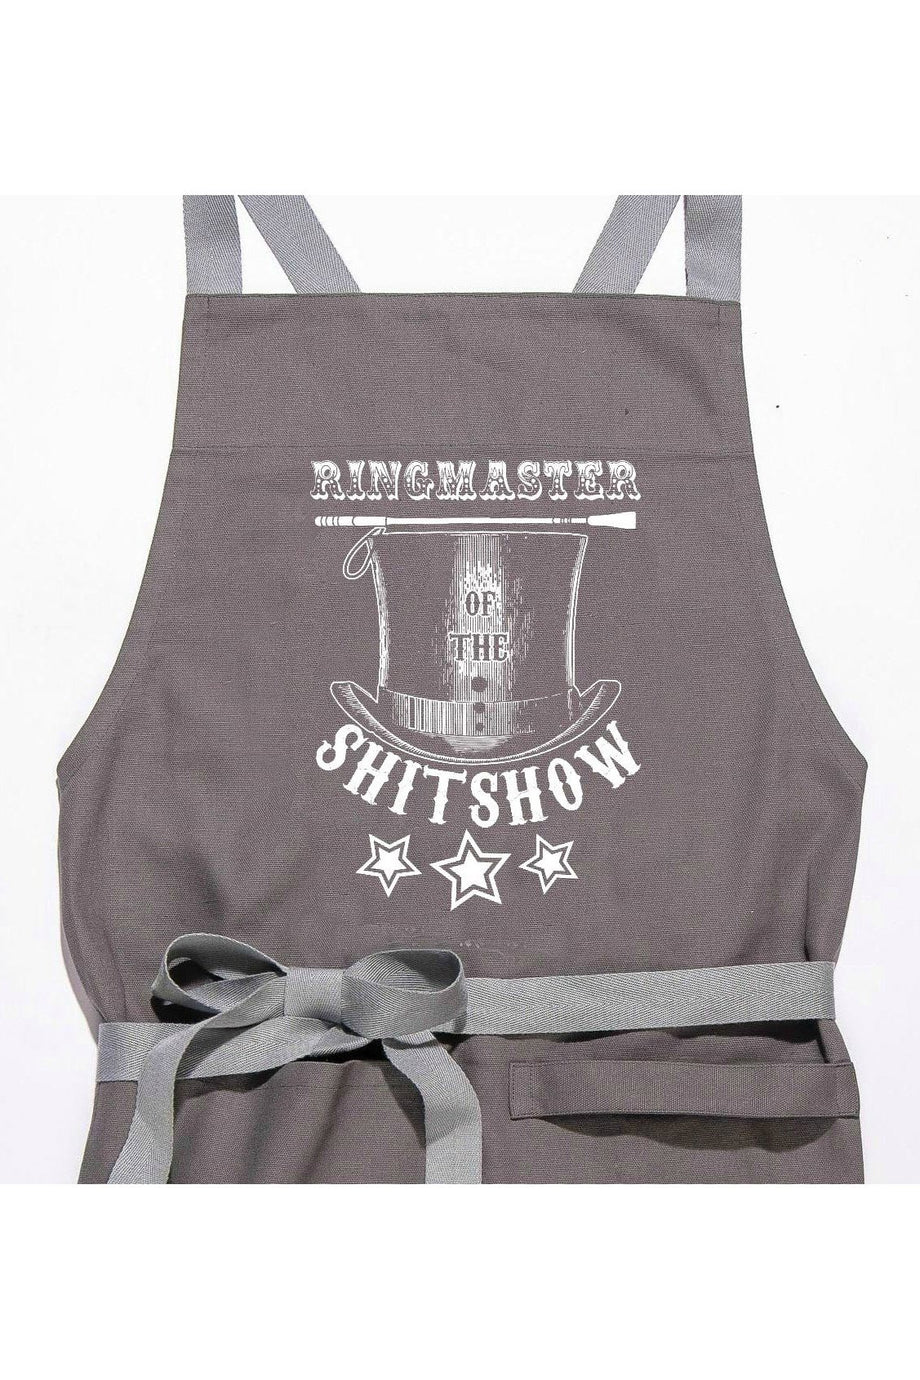 Twisted Wares Ring-Master of the Shit Show Apron